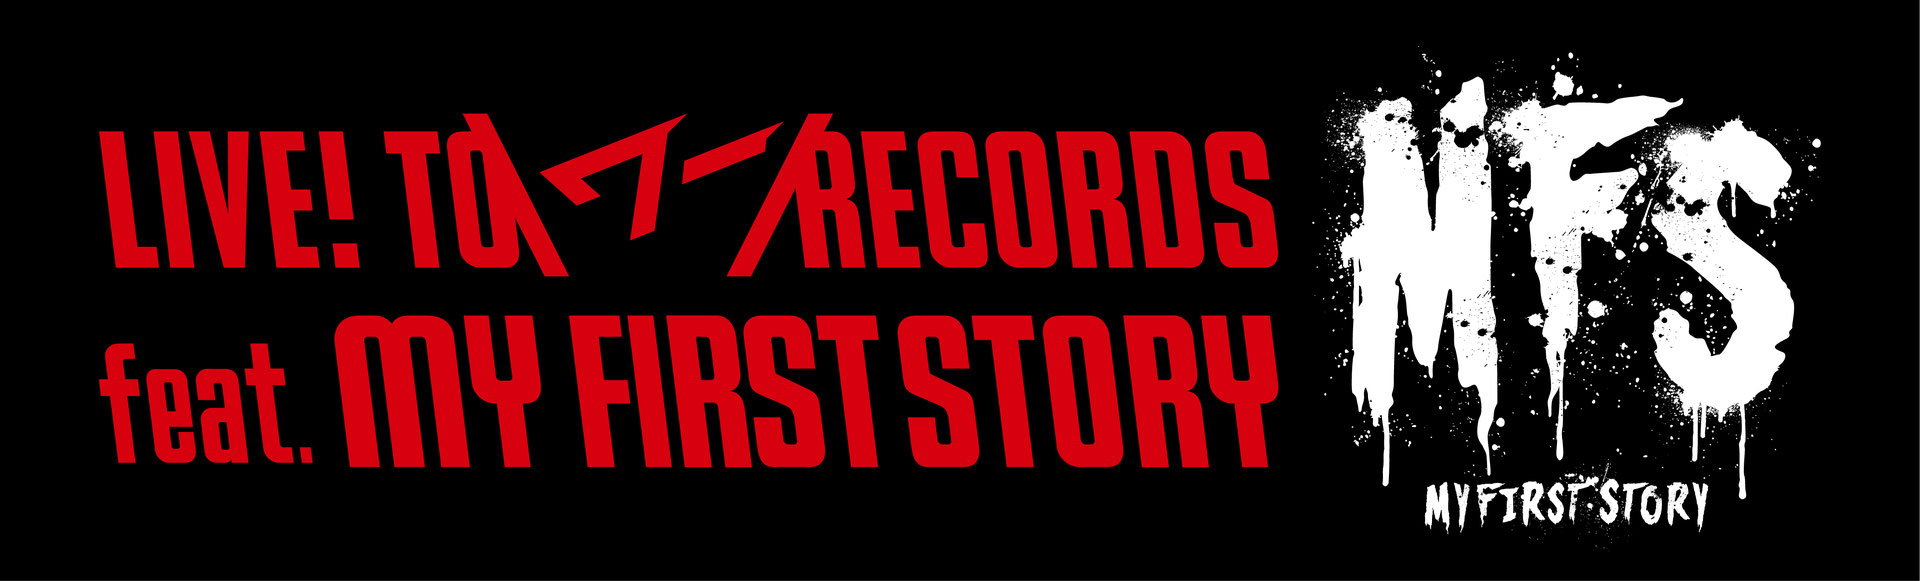 My First Story Live Tower Records